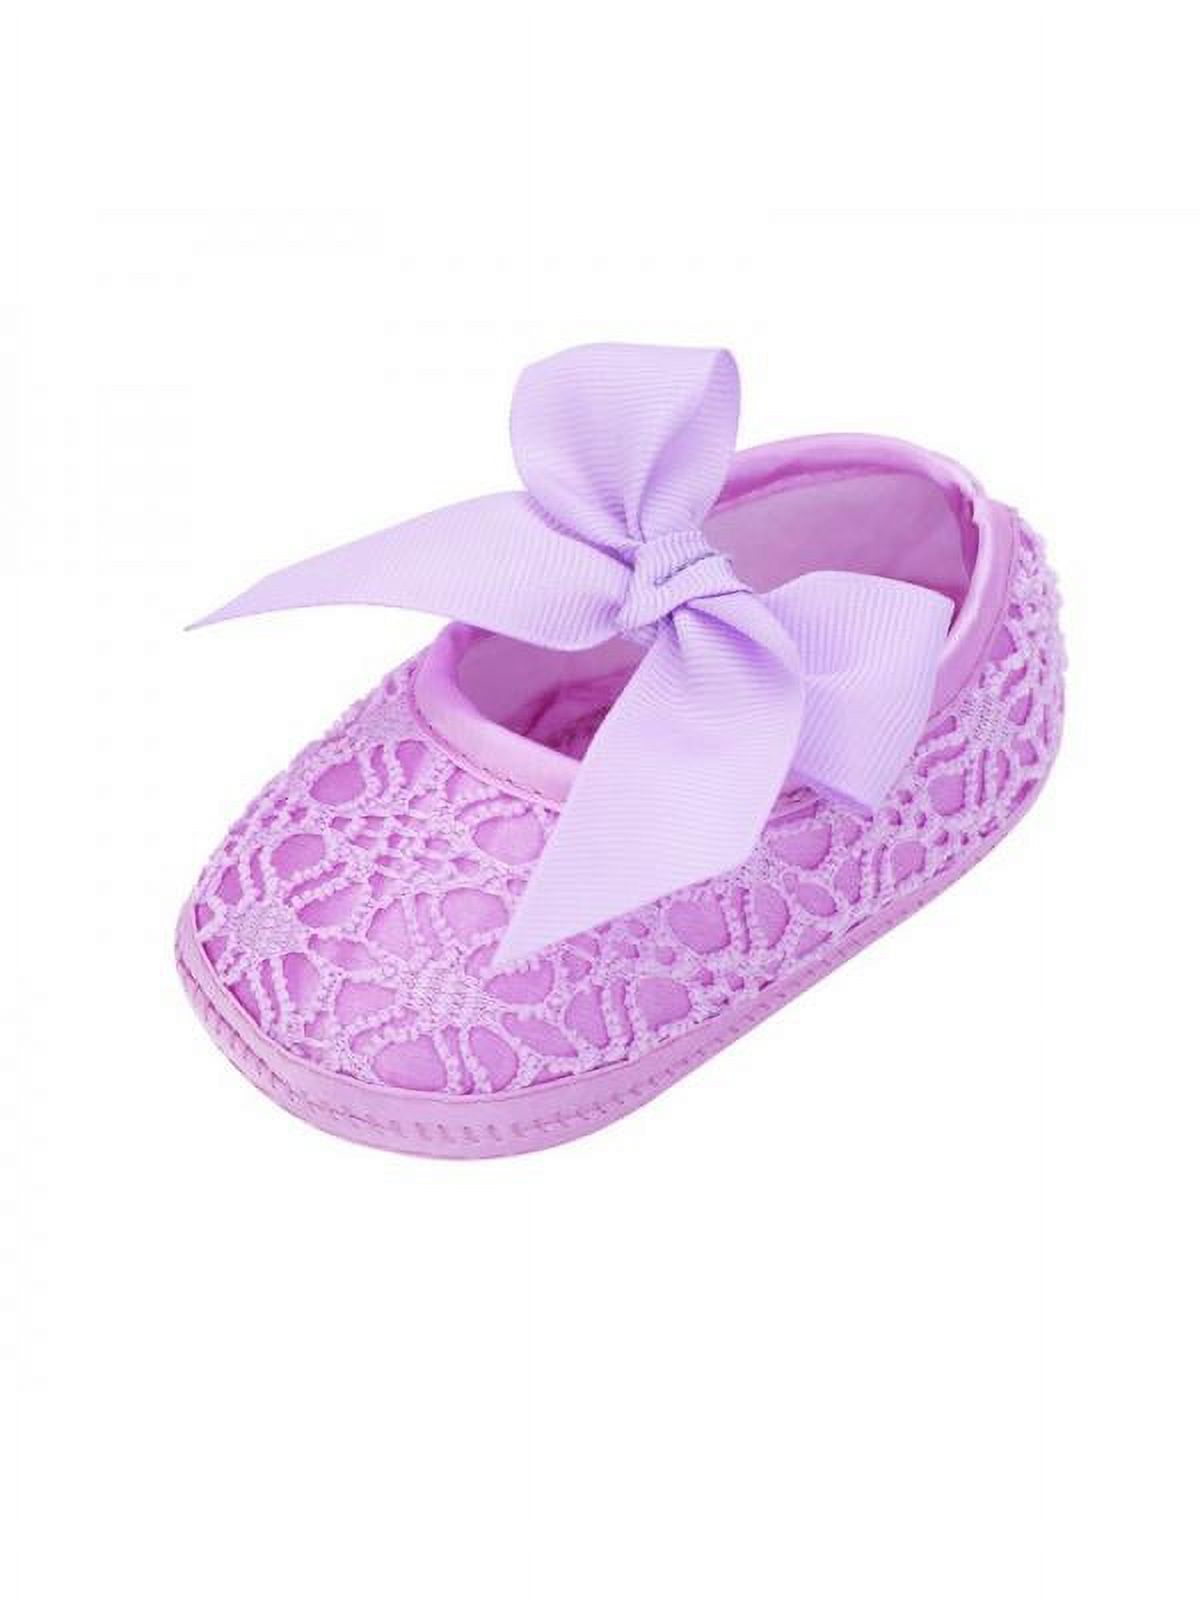 Baby Girl Princess Shoes Lace Mesh Sneakers Toddler Soft Soled First Walker - image 2 of 2